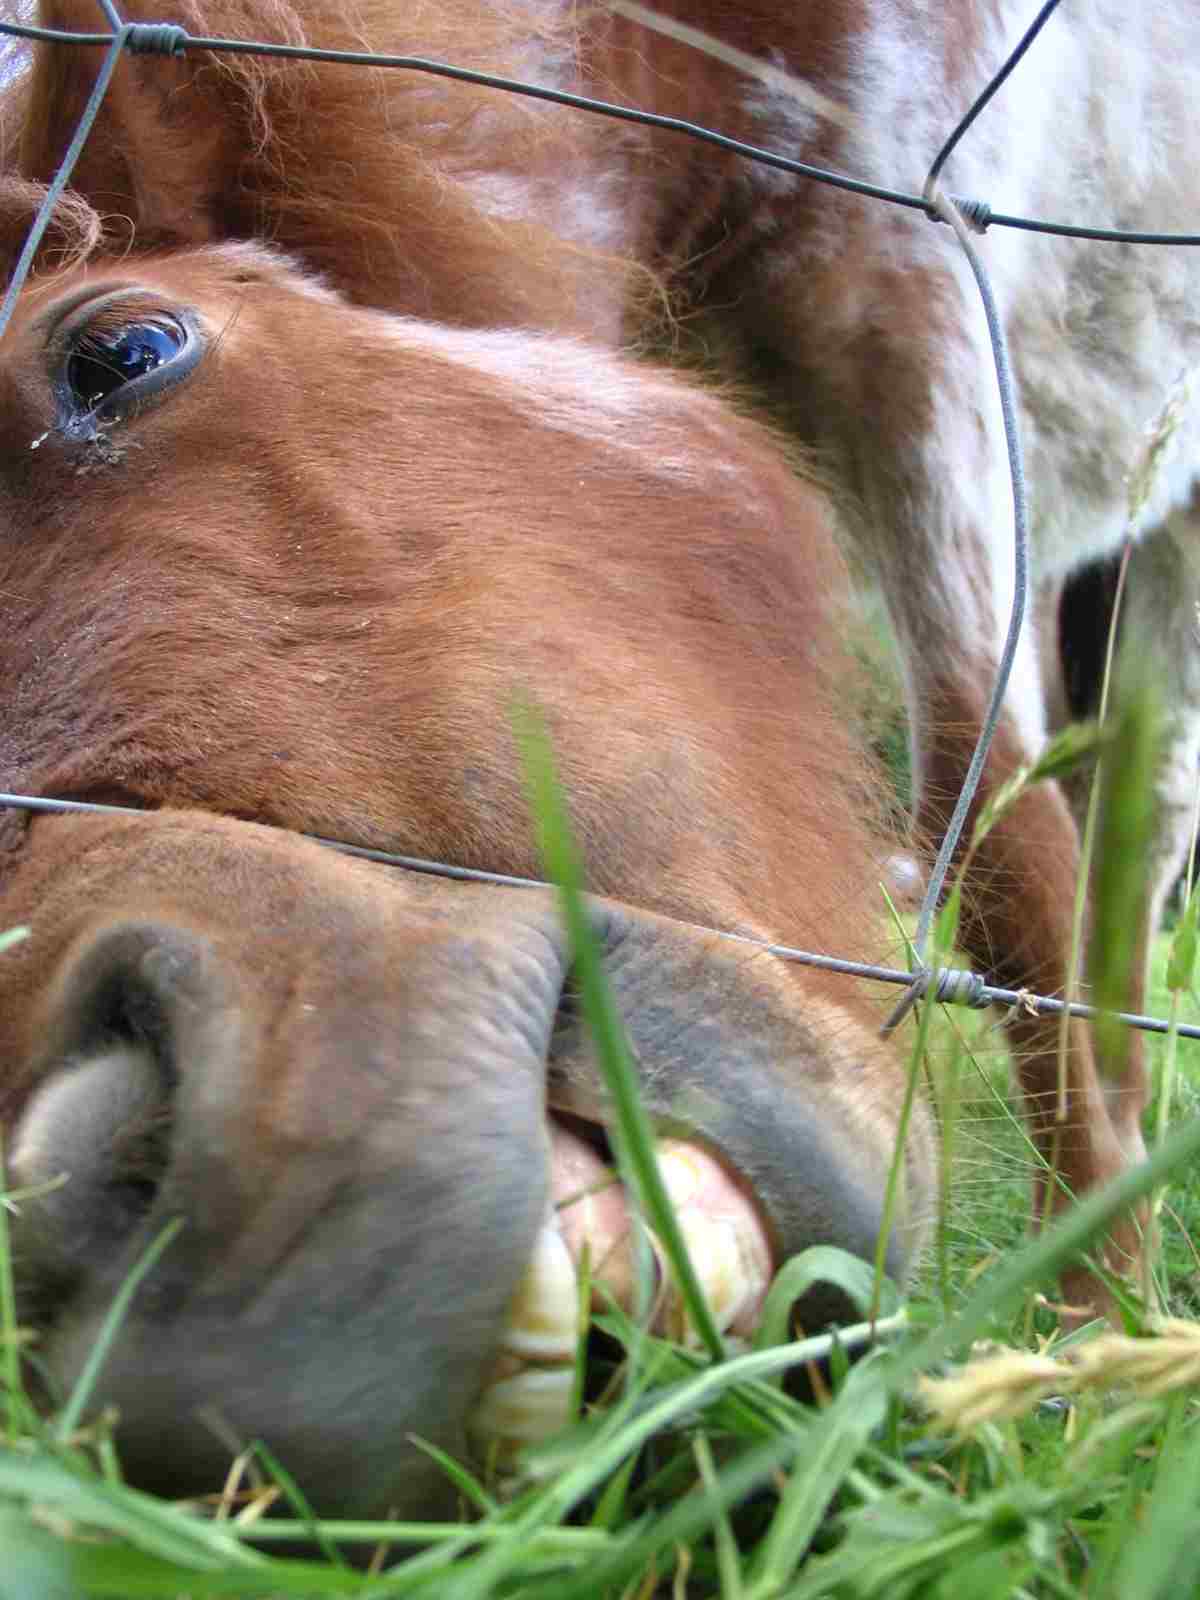 Are Horses Omnivores: Plant-Suited, Dental and Digestive Adaptations Imply that Horses are Herbivores (Credit: Frenkieb 2004 .CC BY 2.0.)